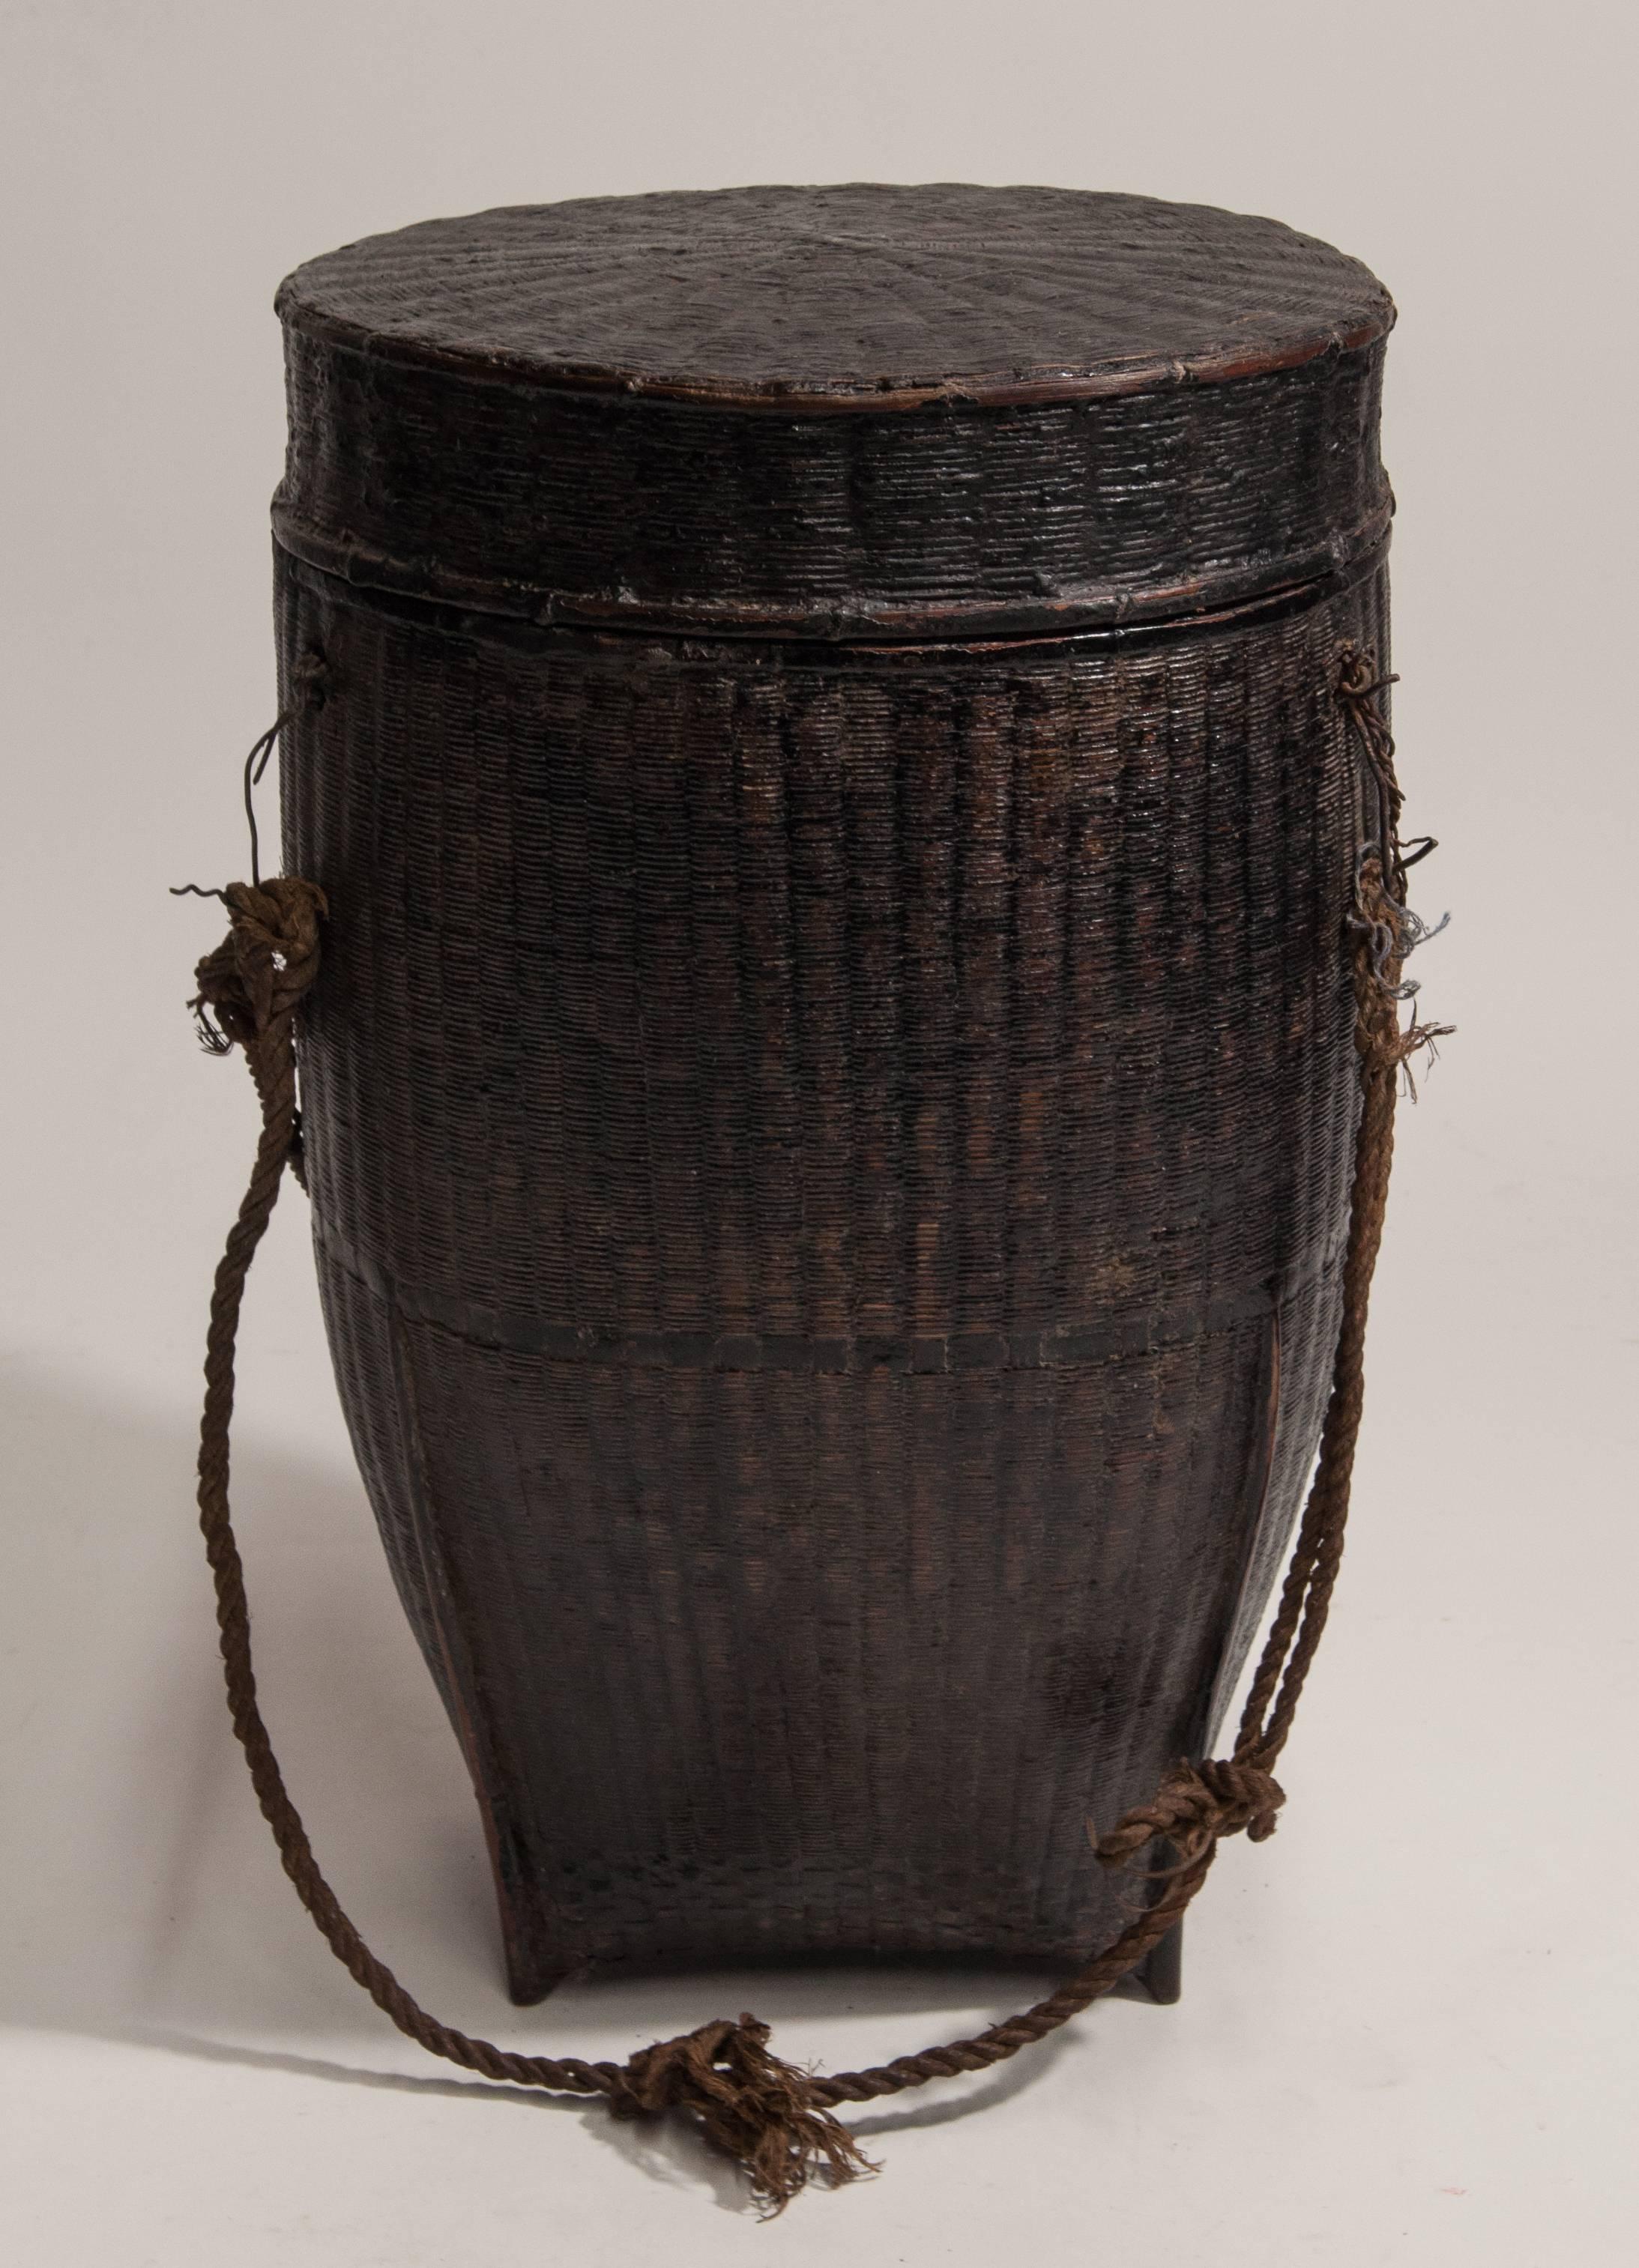 Burmese Tribal Storage Basket with Lid and Lacquer, Karen of Burma, Mid-20th Century